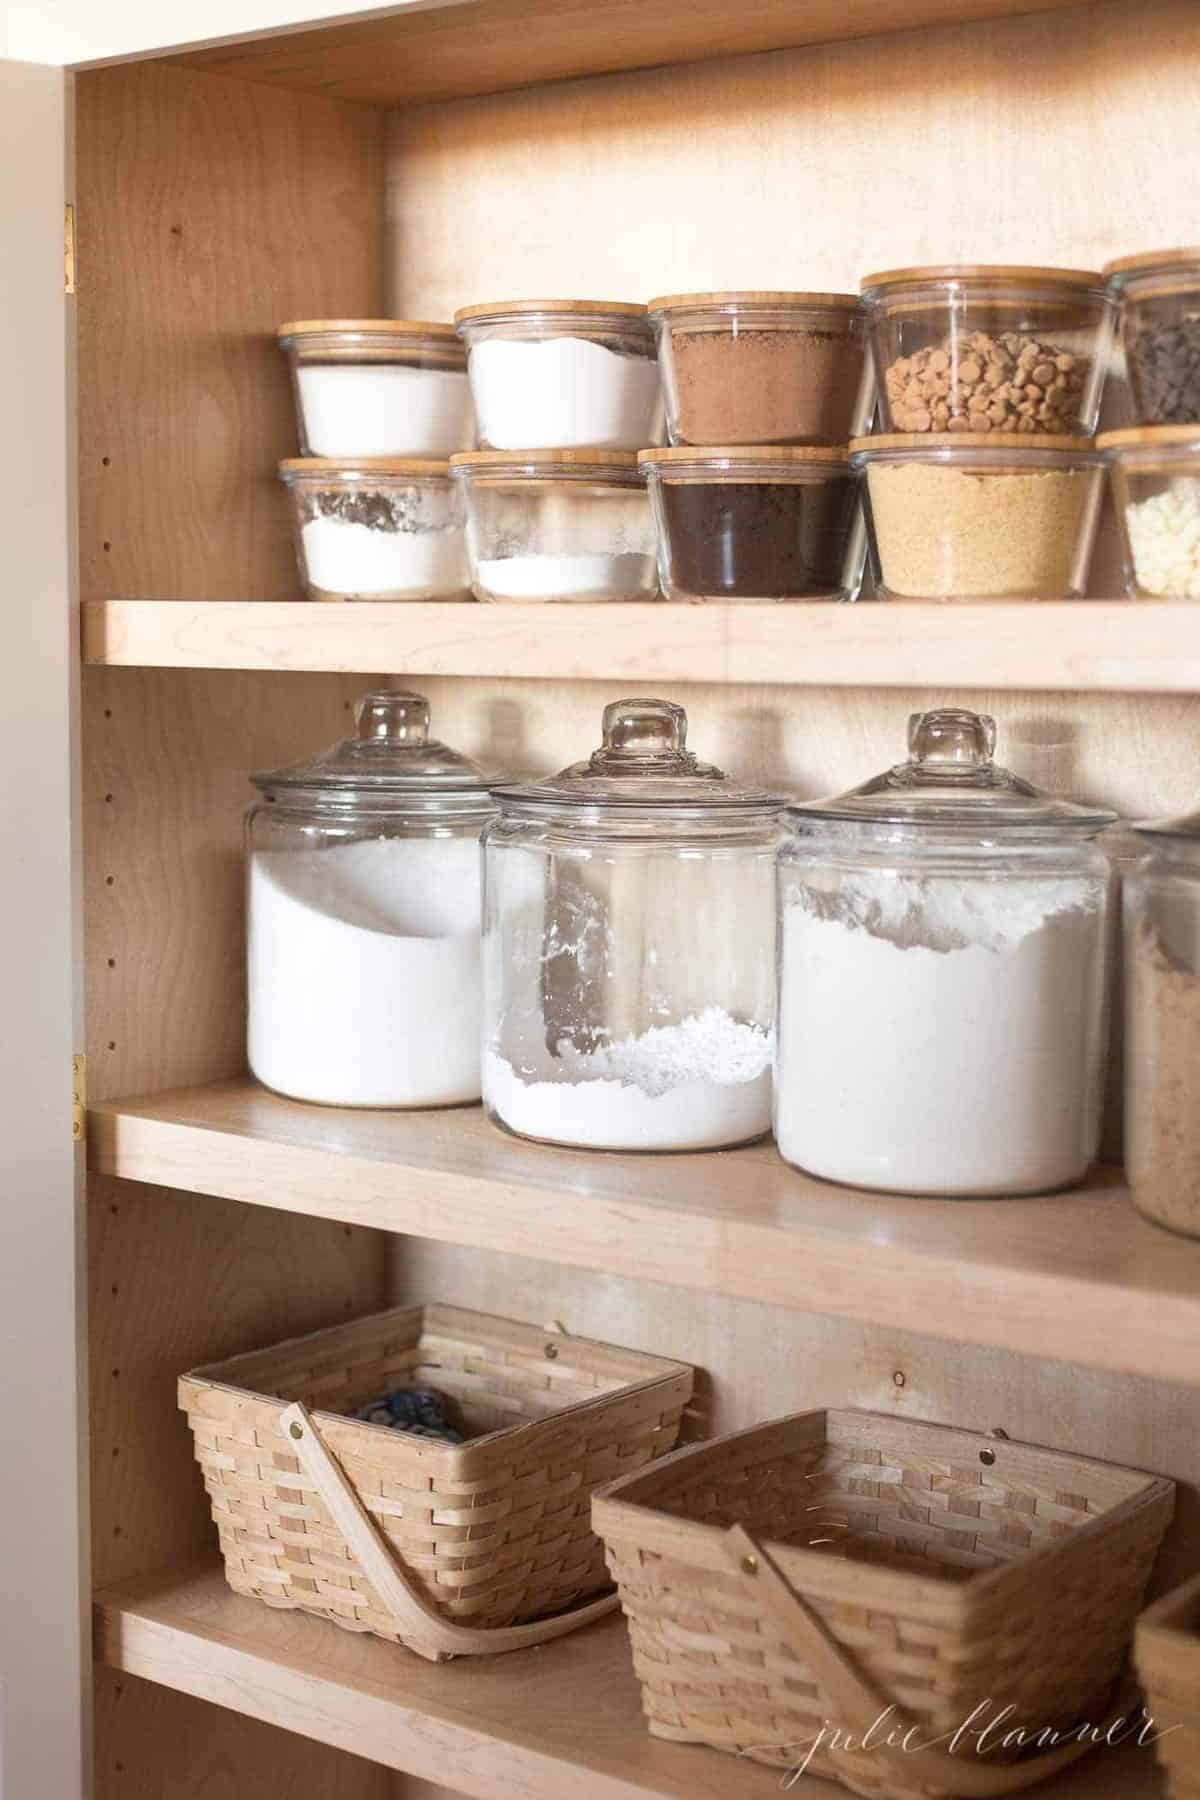 Looking into a pantry cabinet, clear jars and baskets storing food items.